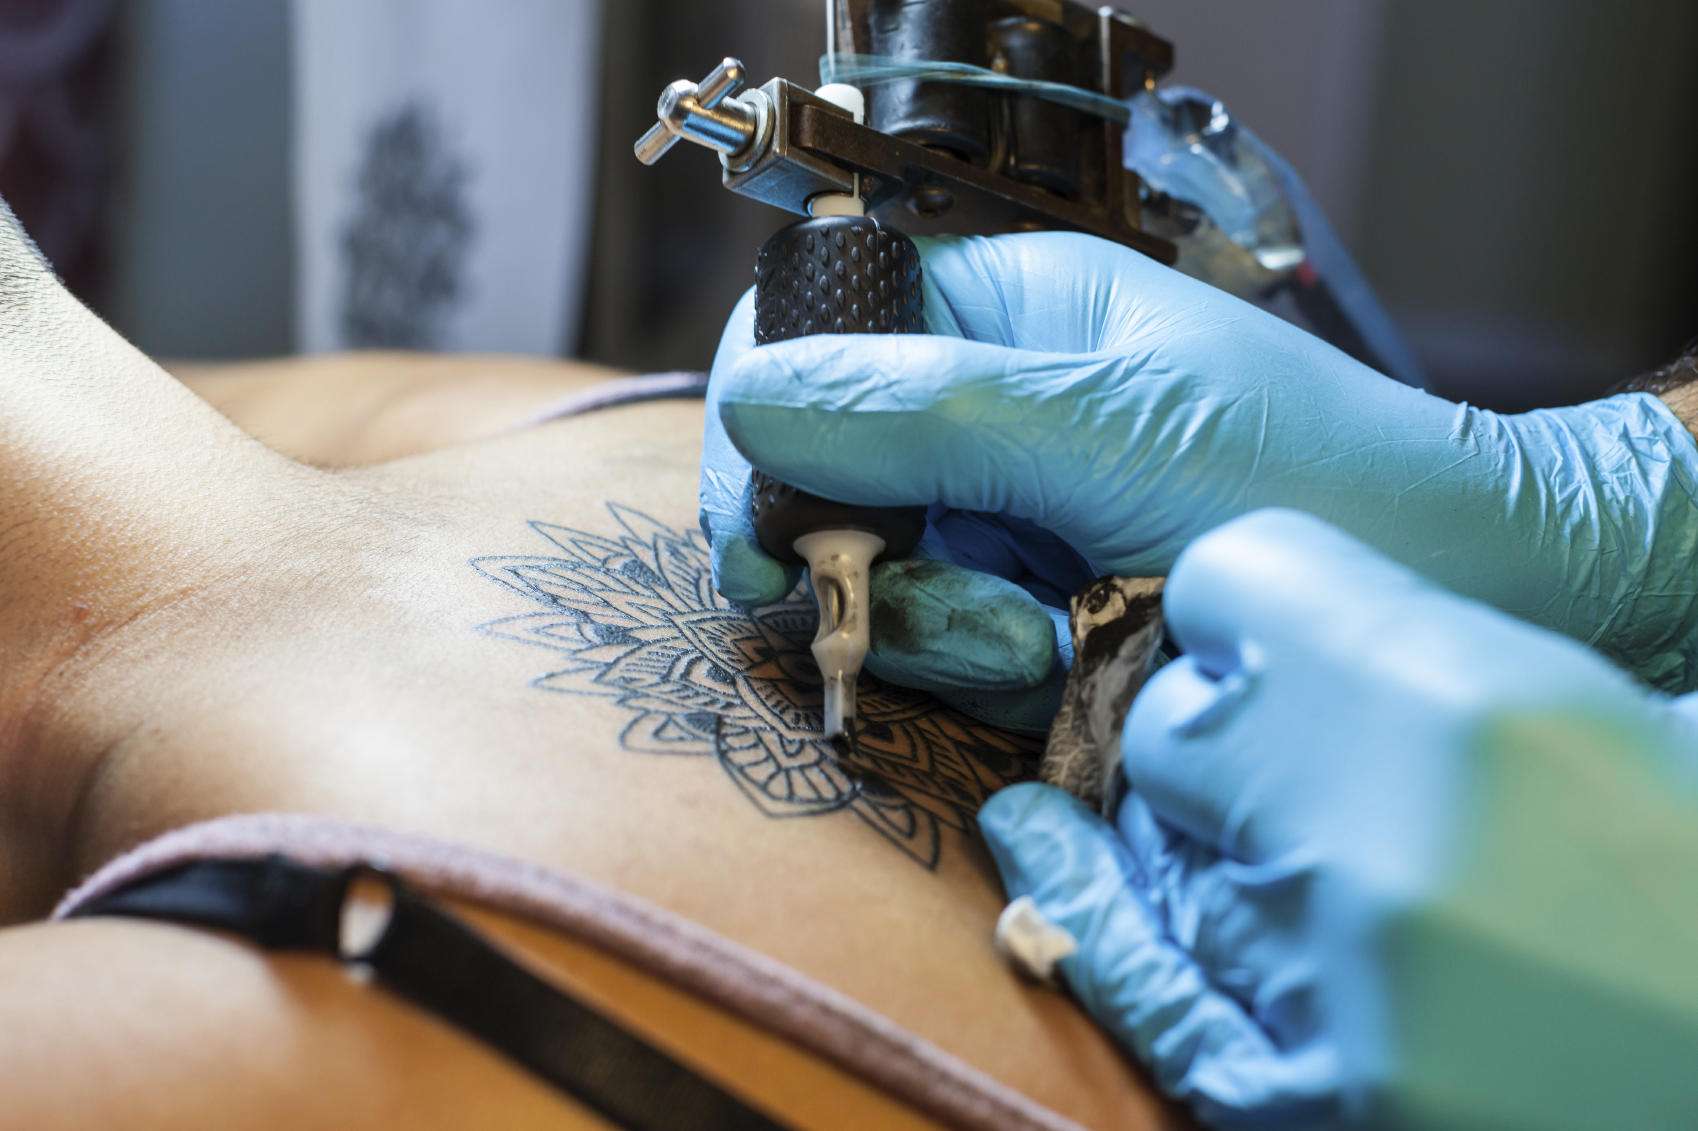 Can Getting a Tattoo Make You Healthier?